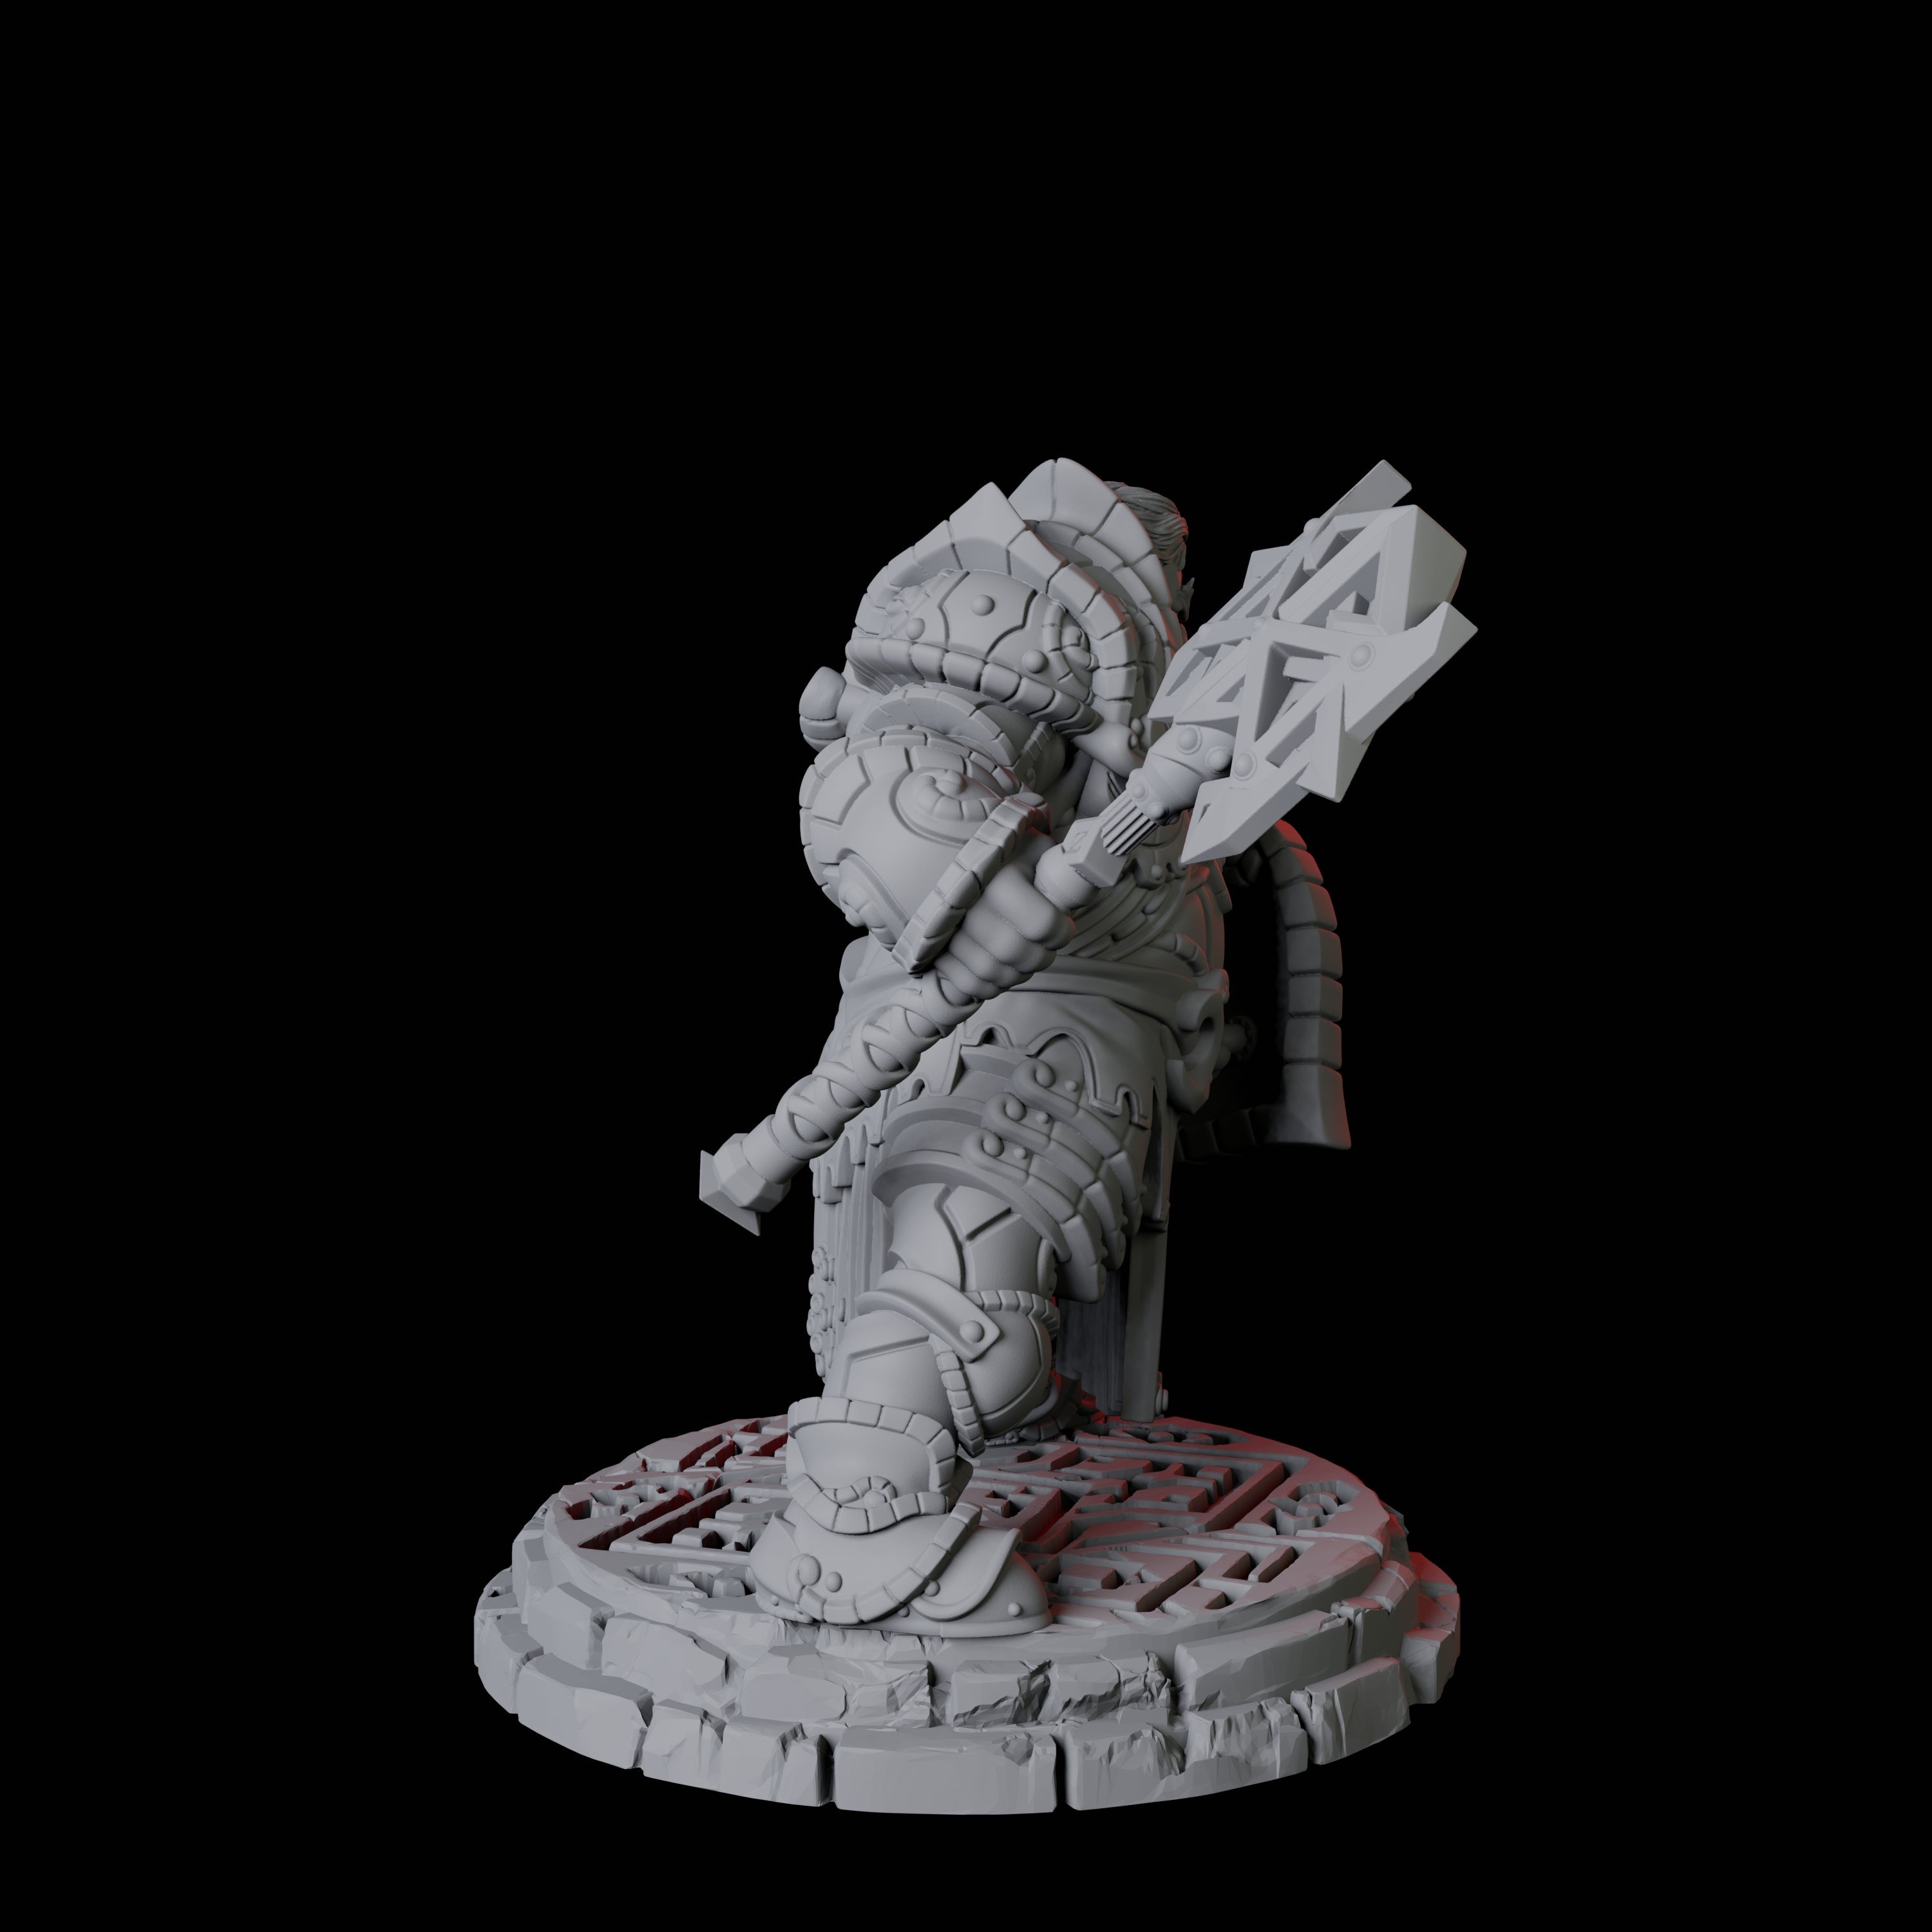 Heavy Armoured Dwarf Warrior D Miniature for Dungeons and Dragons, Pathfinder or other TTRPGs